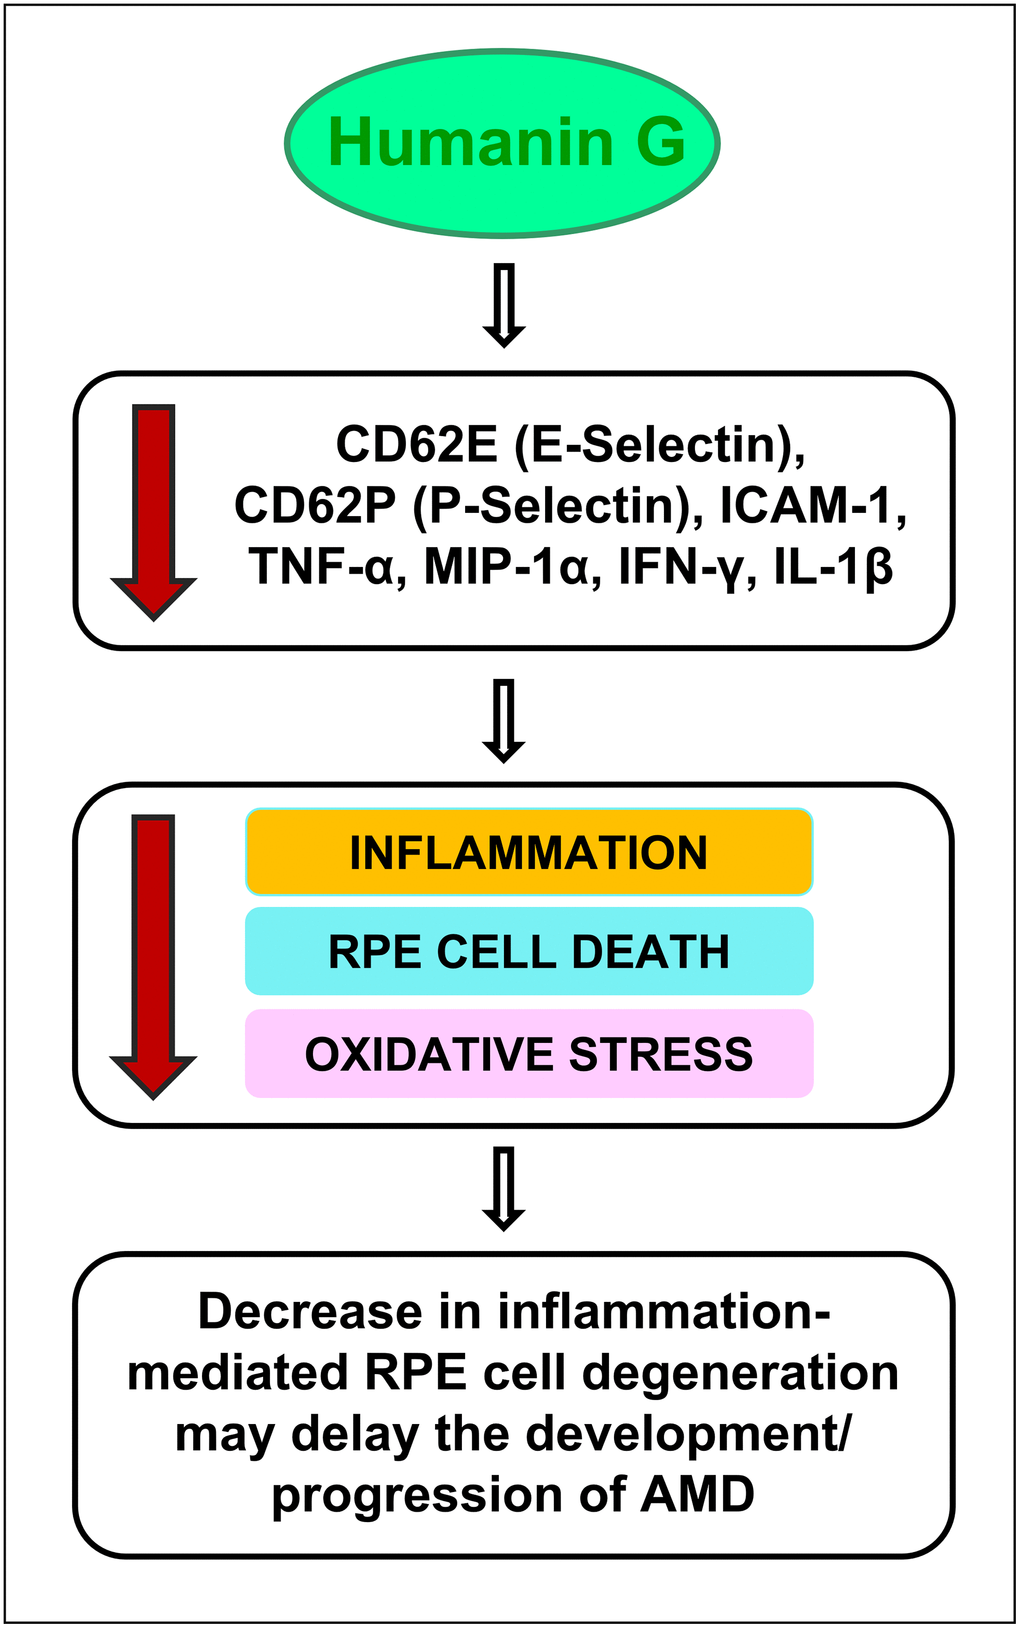 Schematic showing the potential action of Humanin G. Treatment with Humanin G reduces the levels of inflammation-associated proteins namely CD62E (E-Selectin), CD62P (P-Selectin), ICAM-1, TNF-α, MIP-1α, IFN-γ, and IL-1β. This is turn might decrease retinal inflammation, reduce RPE cell death and oxidative stress, thereby preventing retinal degeneration. This may delay the development/ progression of AMD.